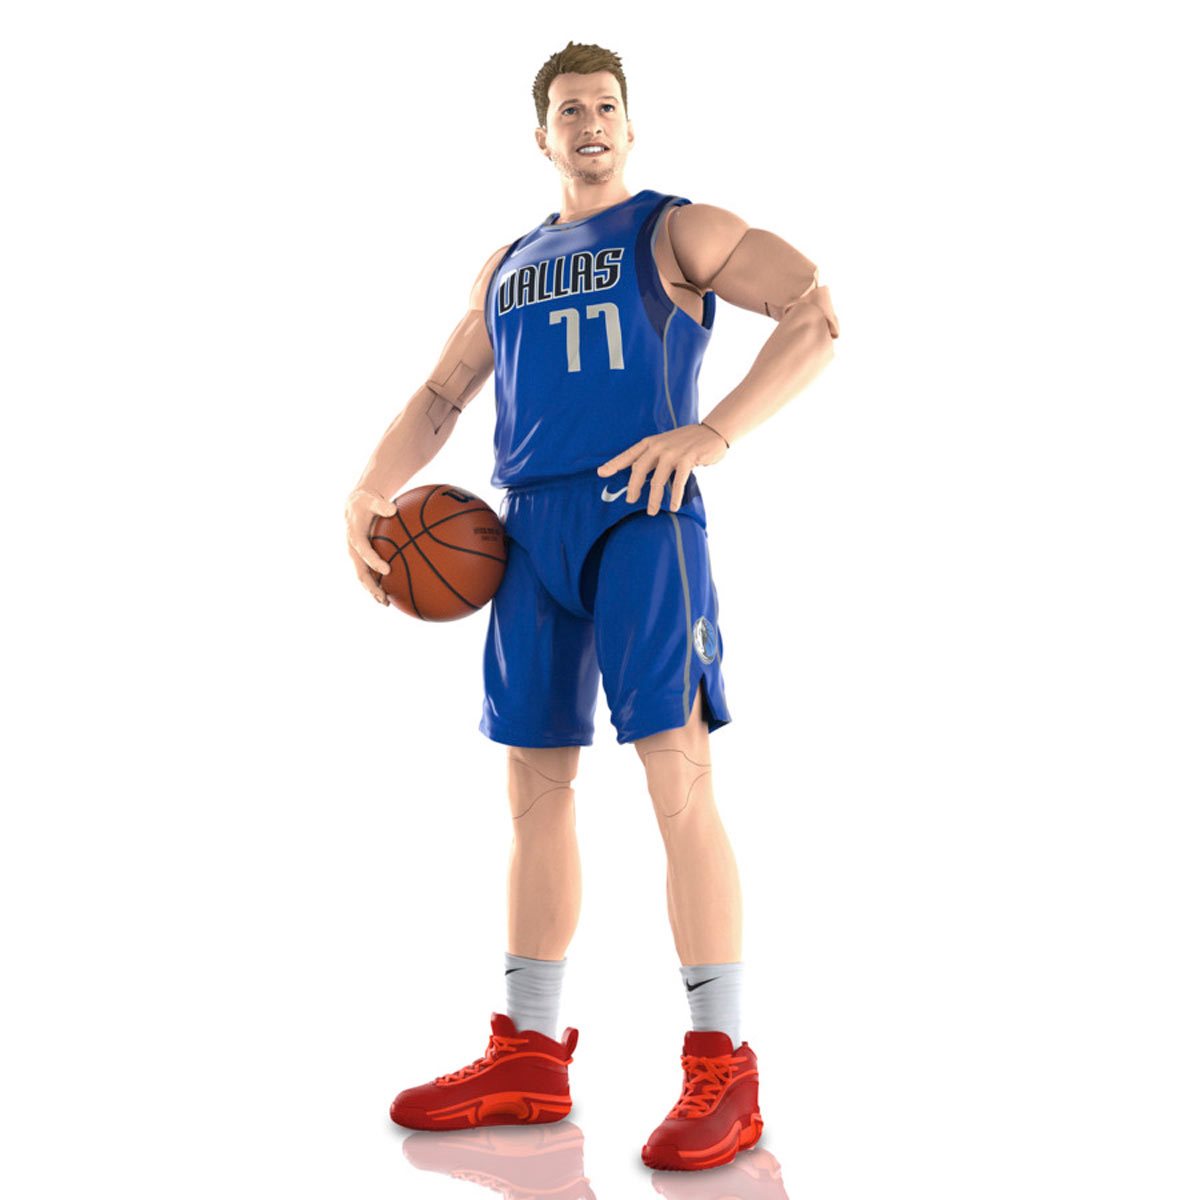 height luka doncic